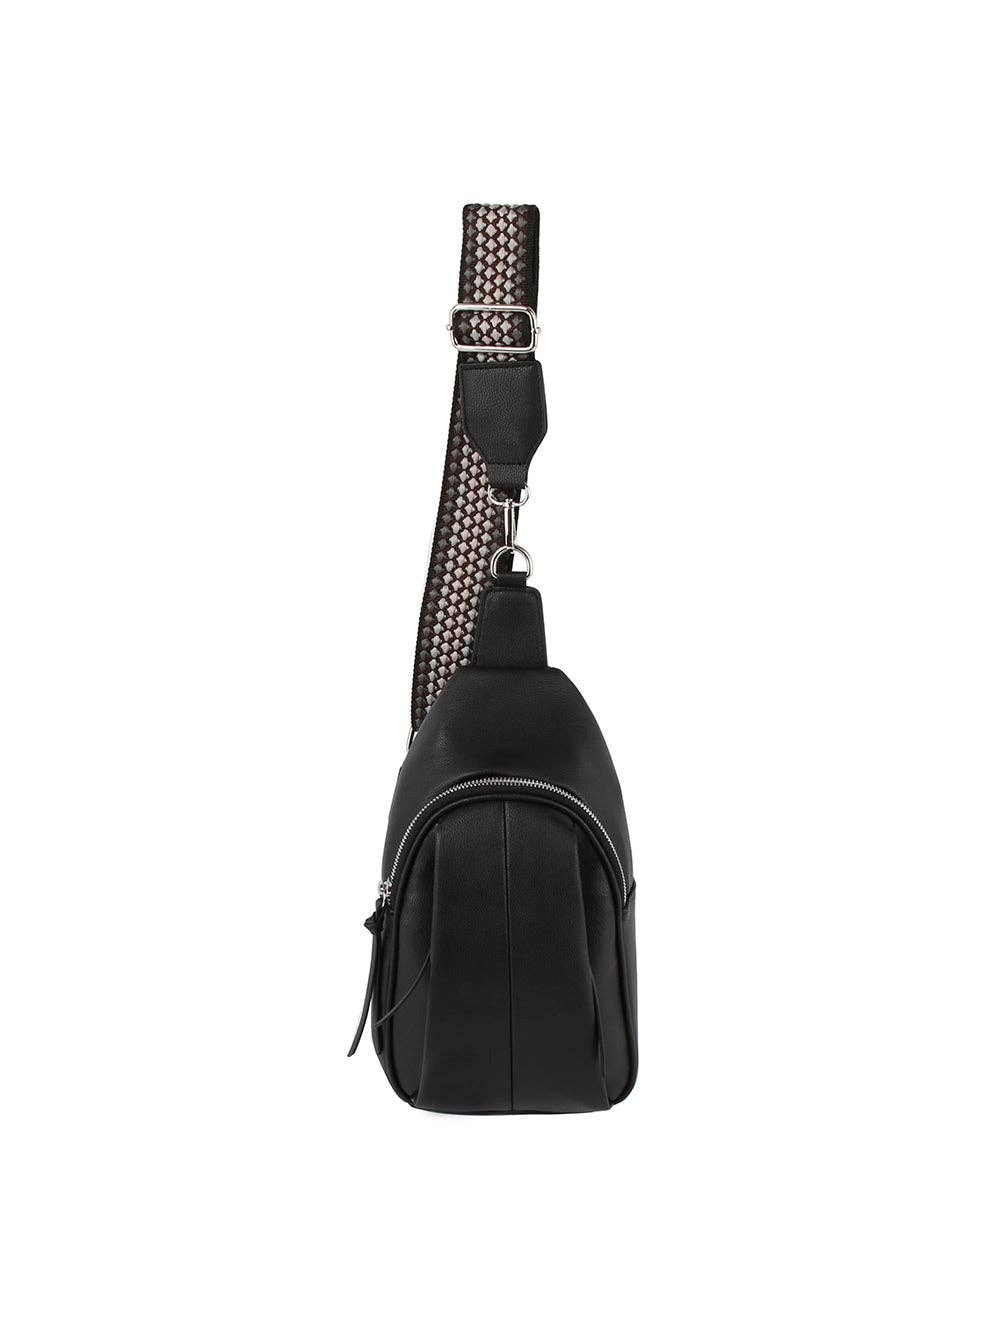 Soft leather sling bag with guitar strap - The Floratory